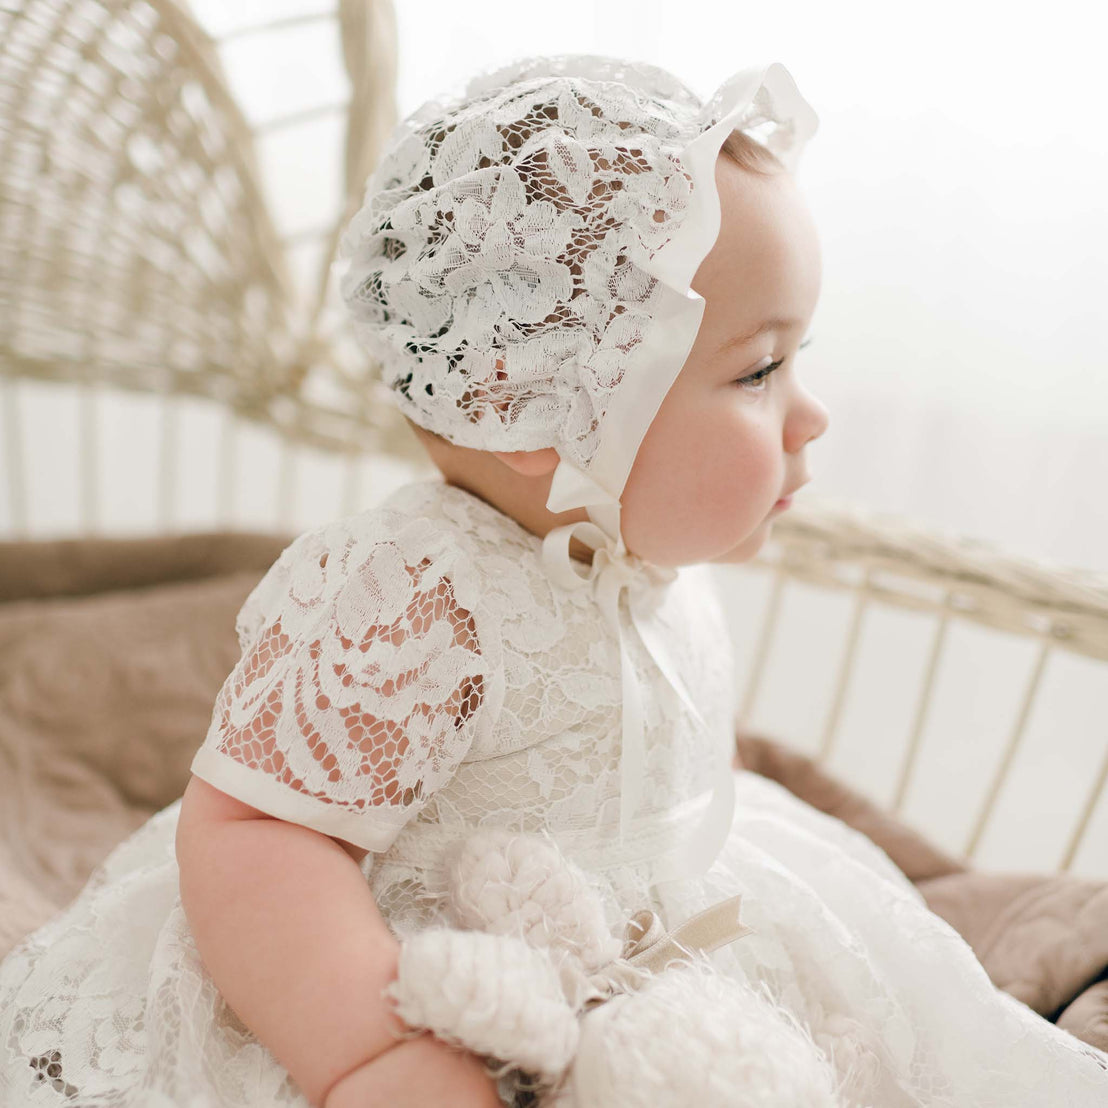 A baby wearing a lace dress and a Rose Lace Bonnet sits in a wicker chair, gazing to the side with a thoughtful expression. The setting is softly lit, creating a warm, gentle atmosphere.